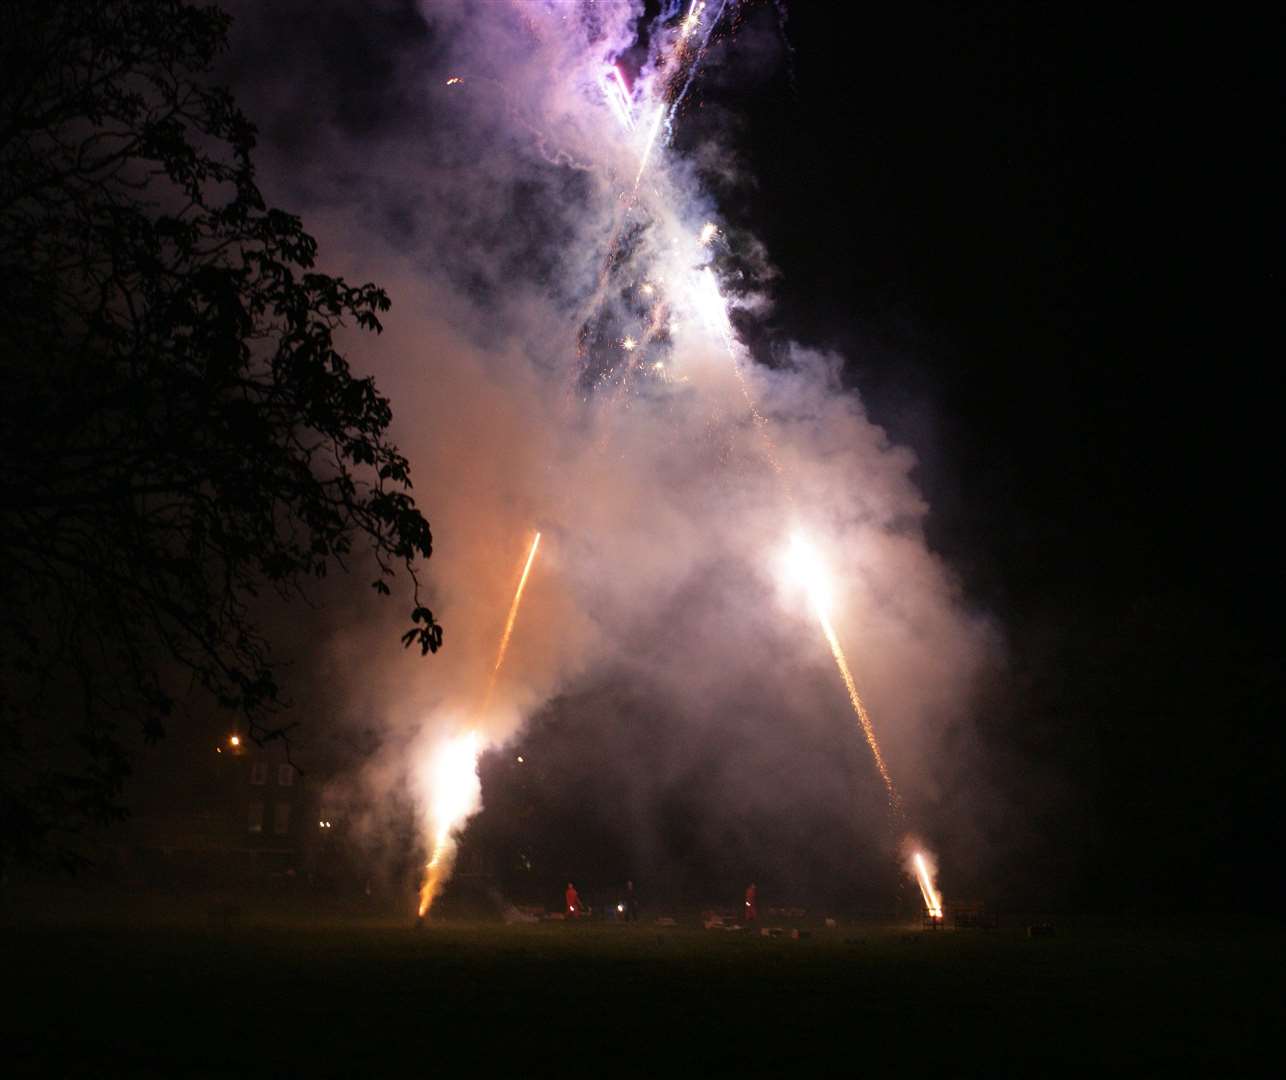 A previous fireworks display at Quex Park